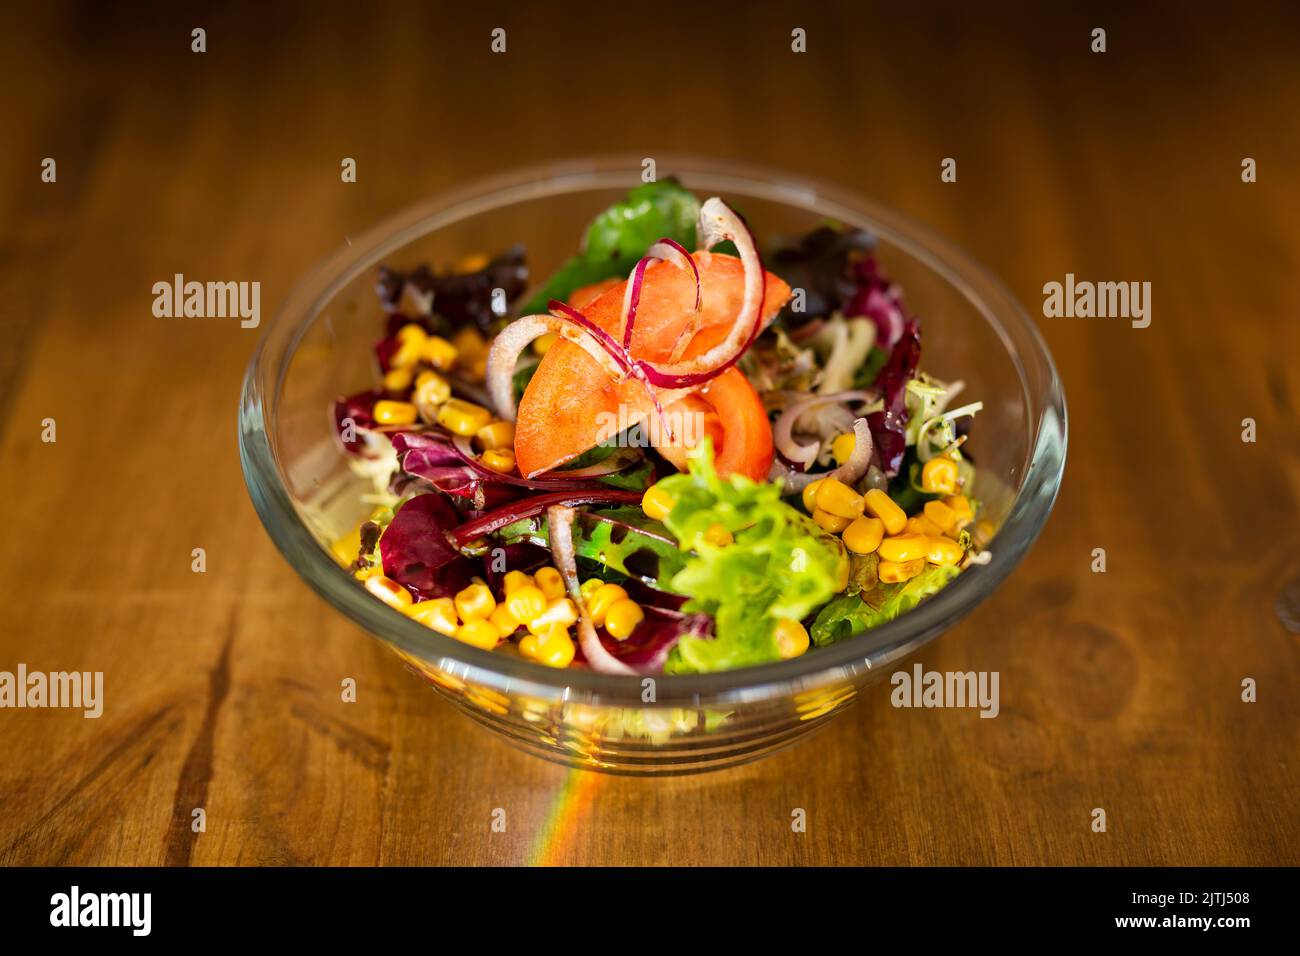 Green salad in a big bowl on a wooden table Stock Photo